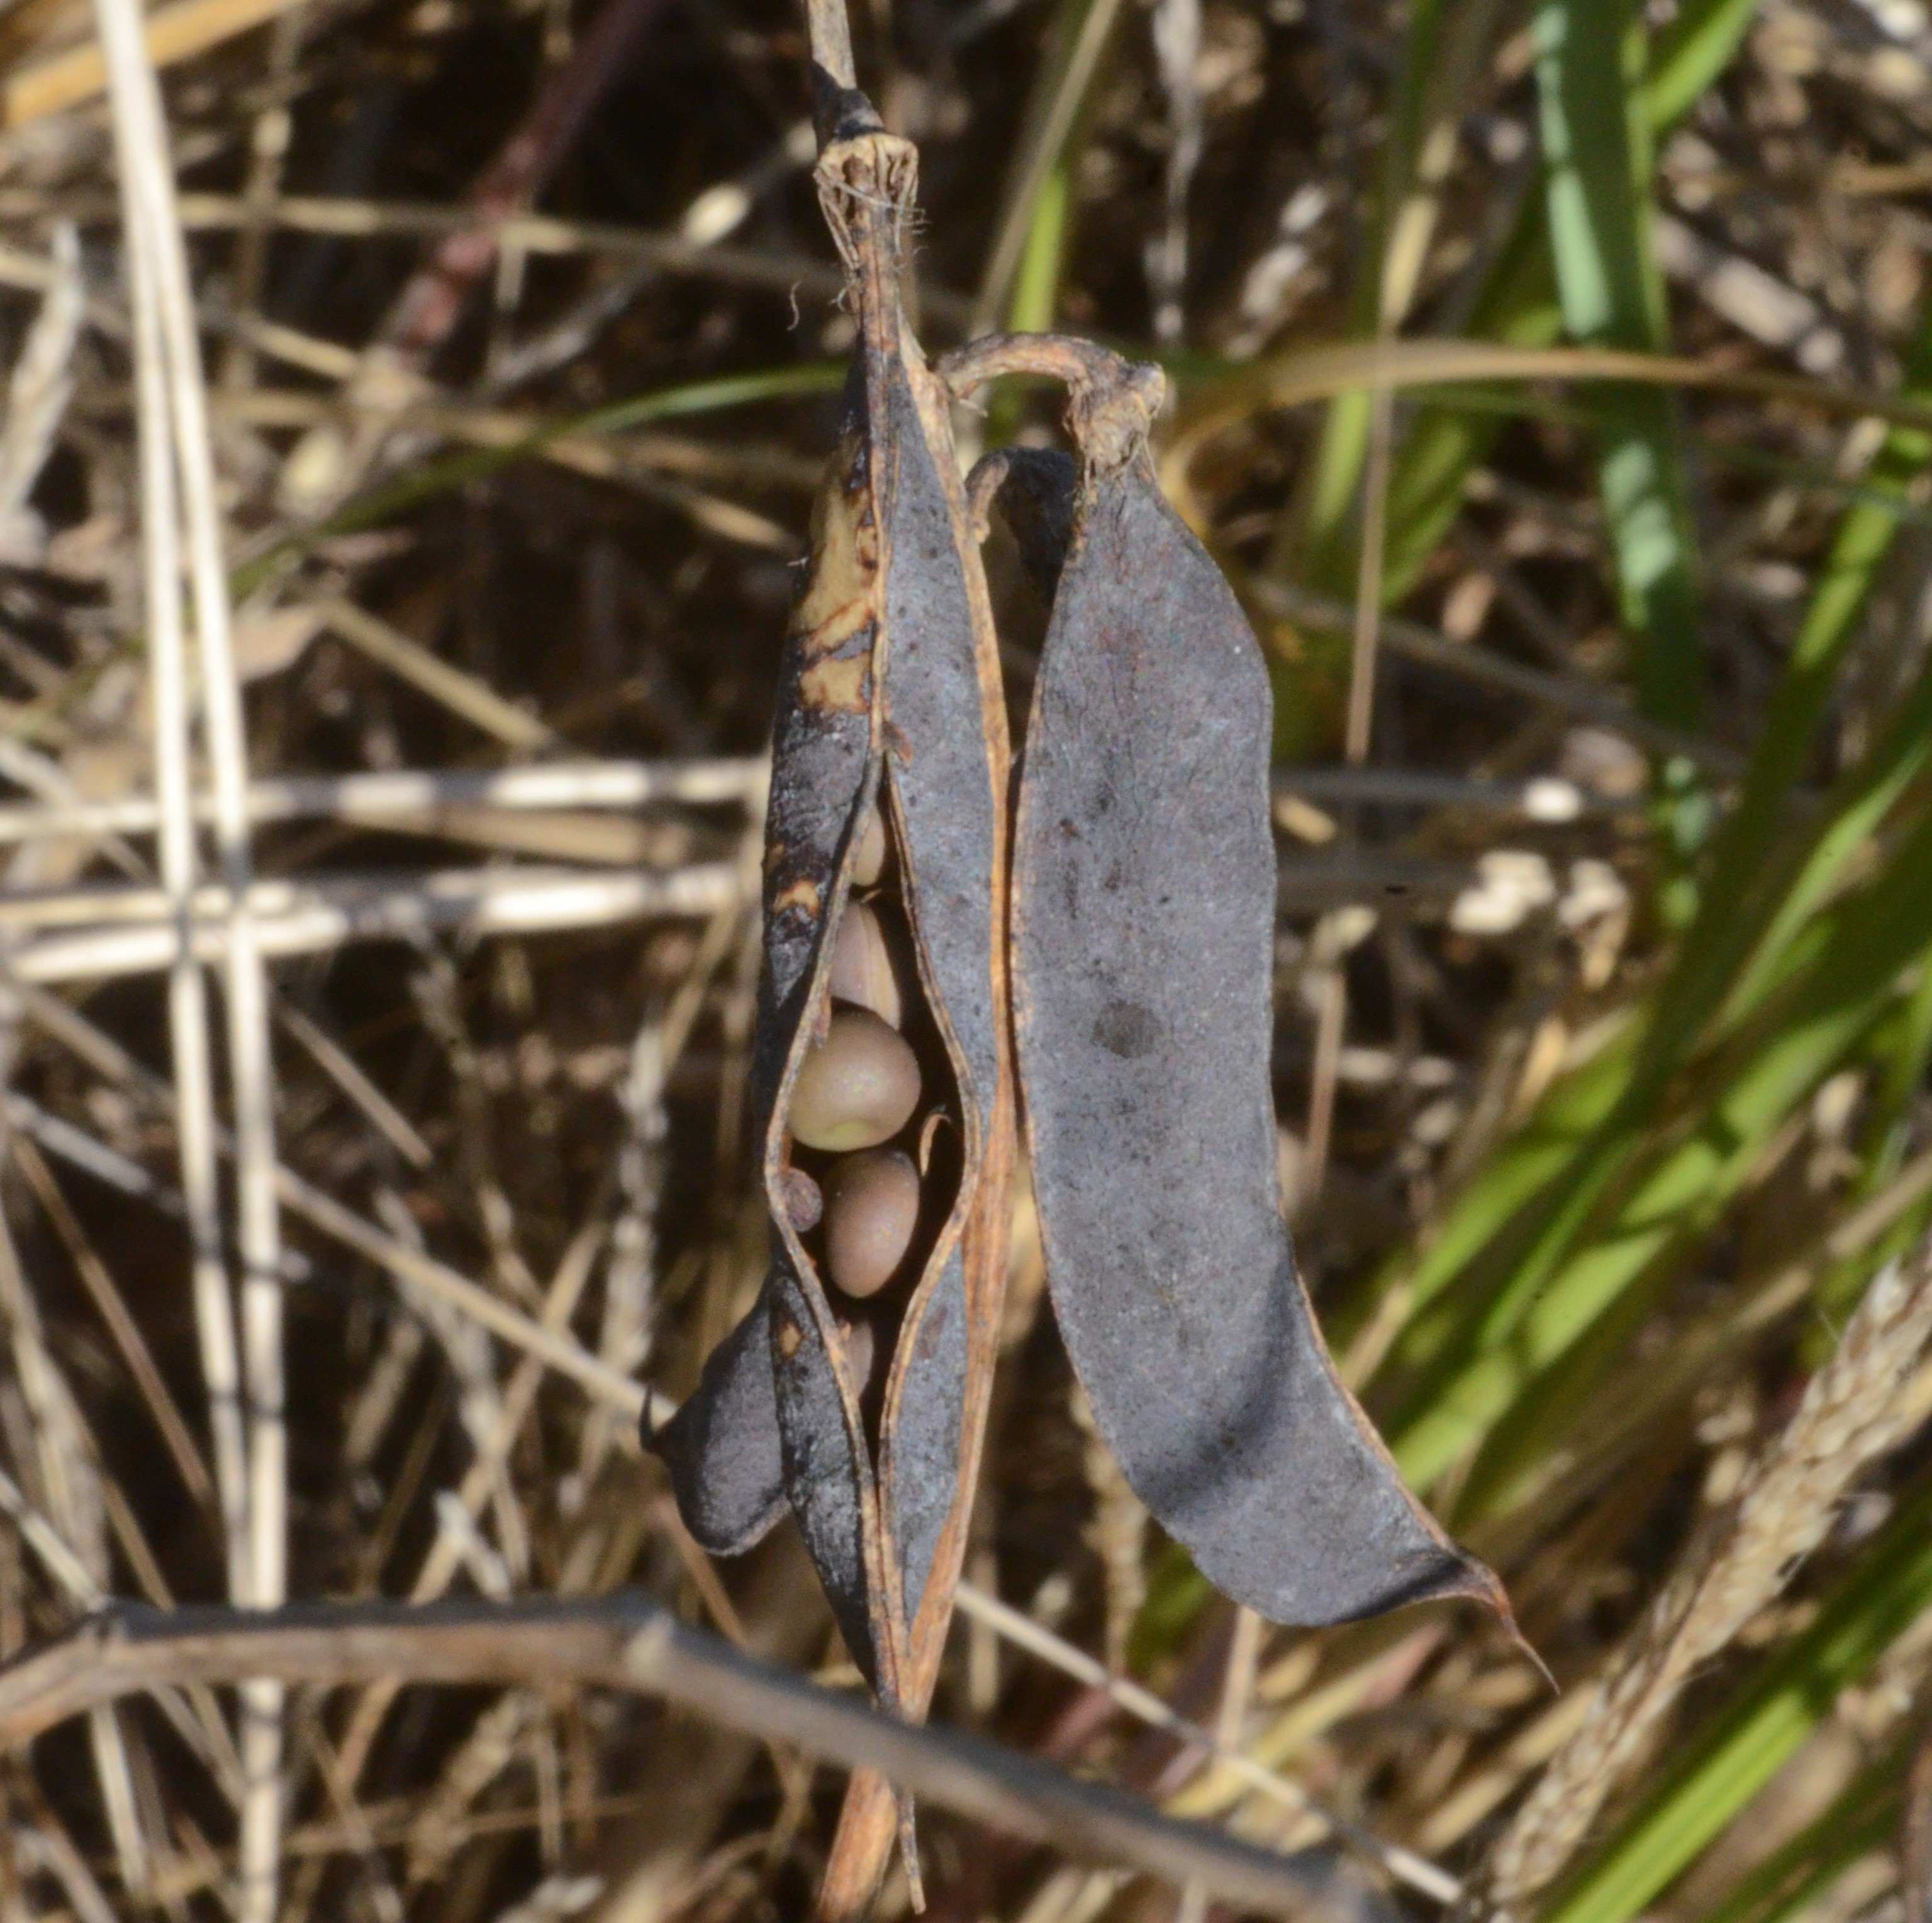 Lathyrus japonicus fruits with a few seeds visible.